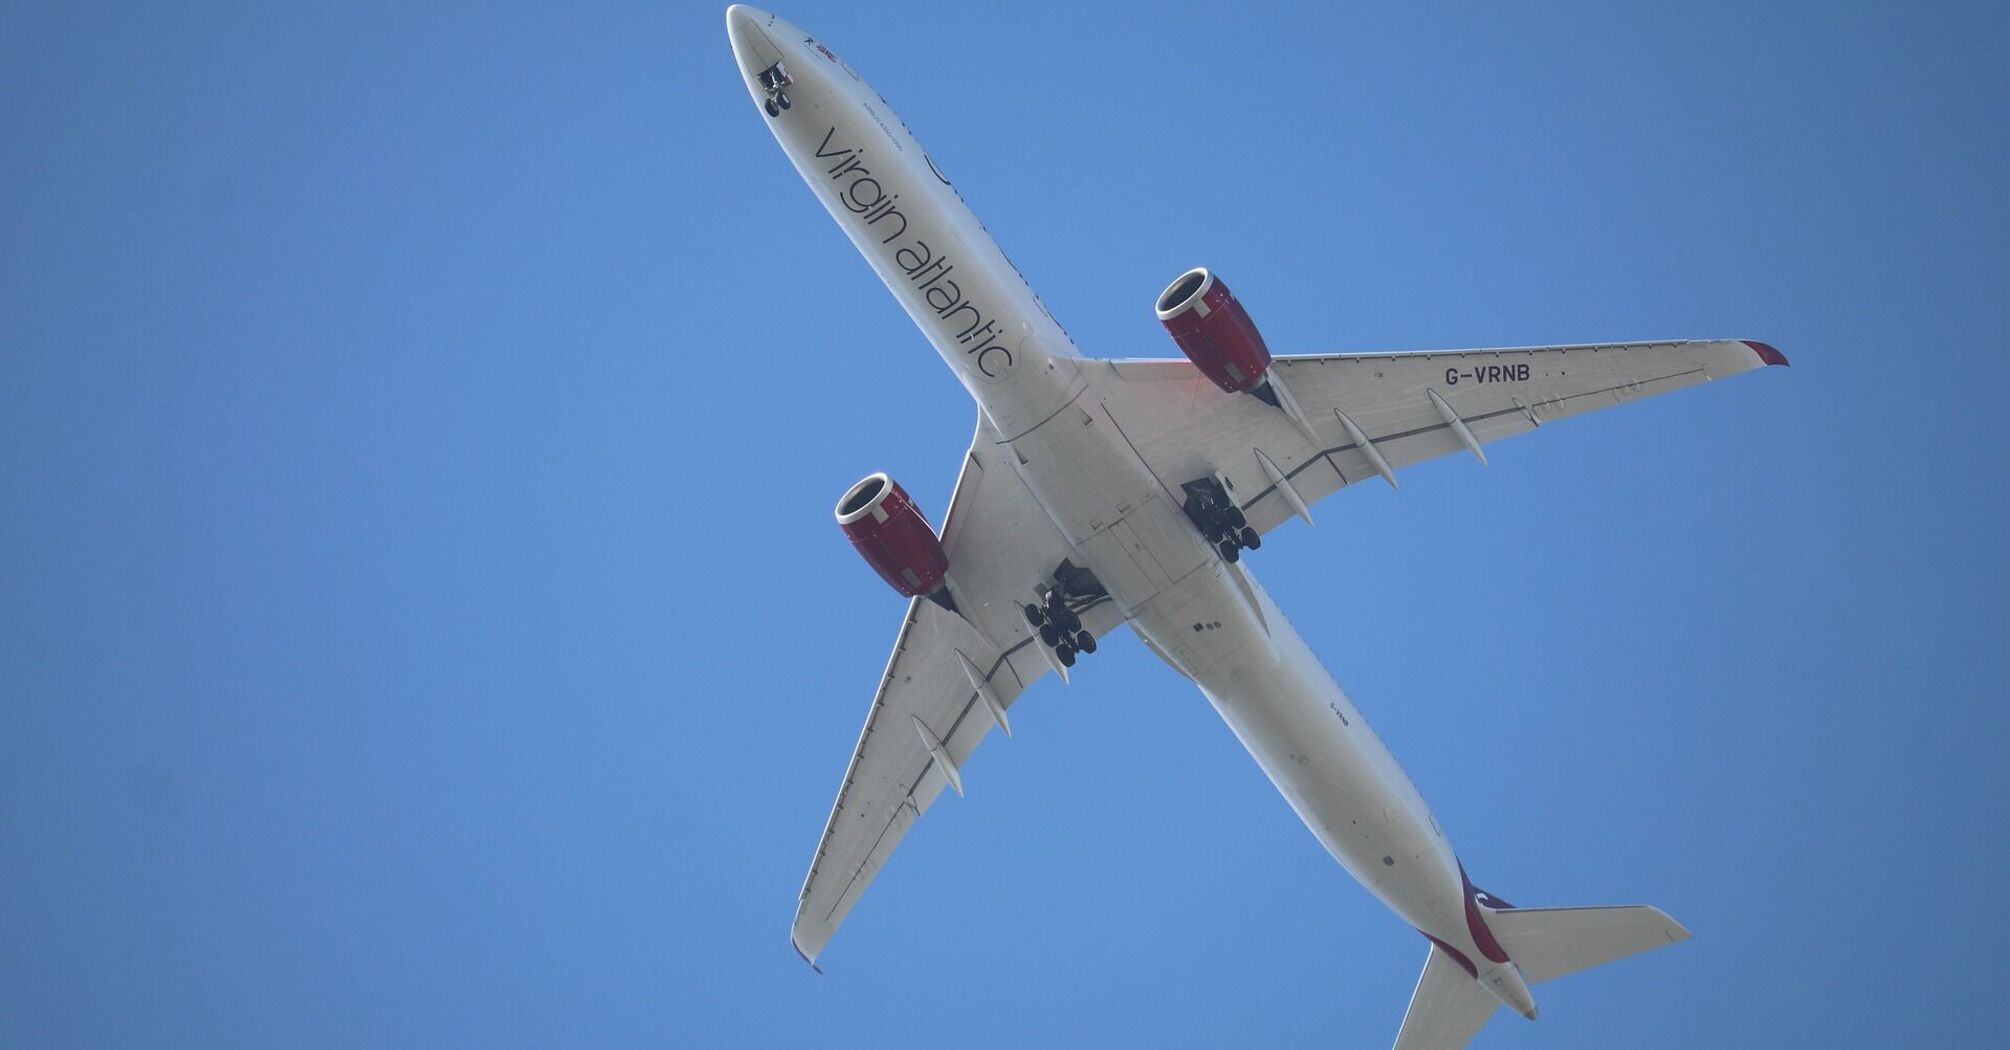 Overhead view of a Virgin Atlantic Airbus A330 in flight against a clear blue sky